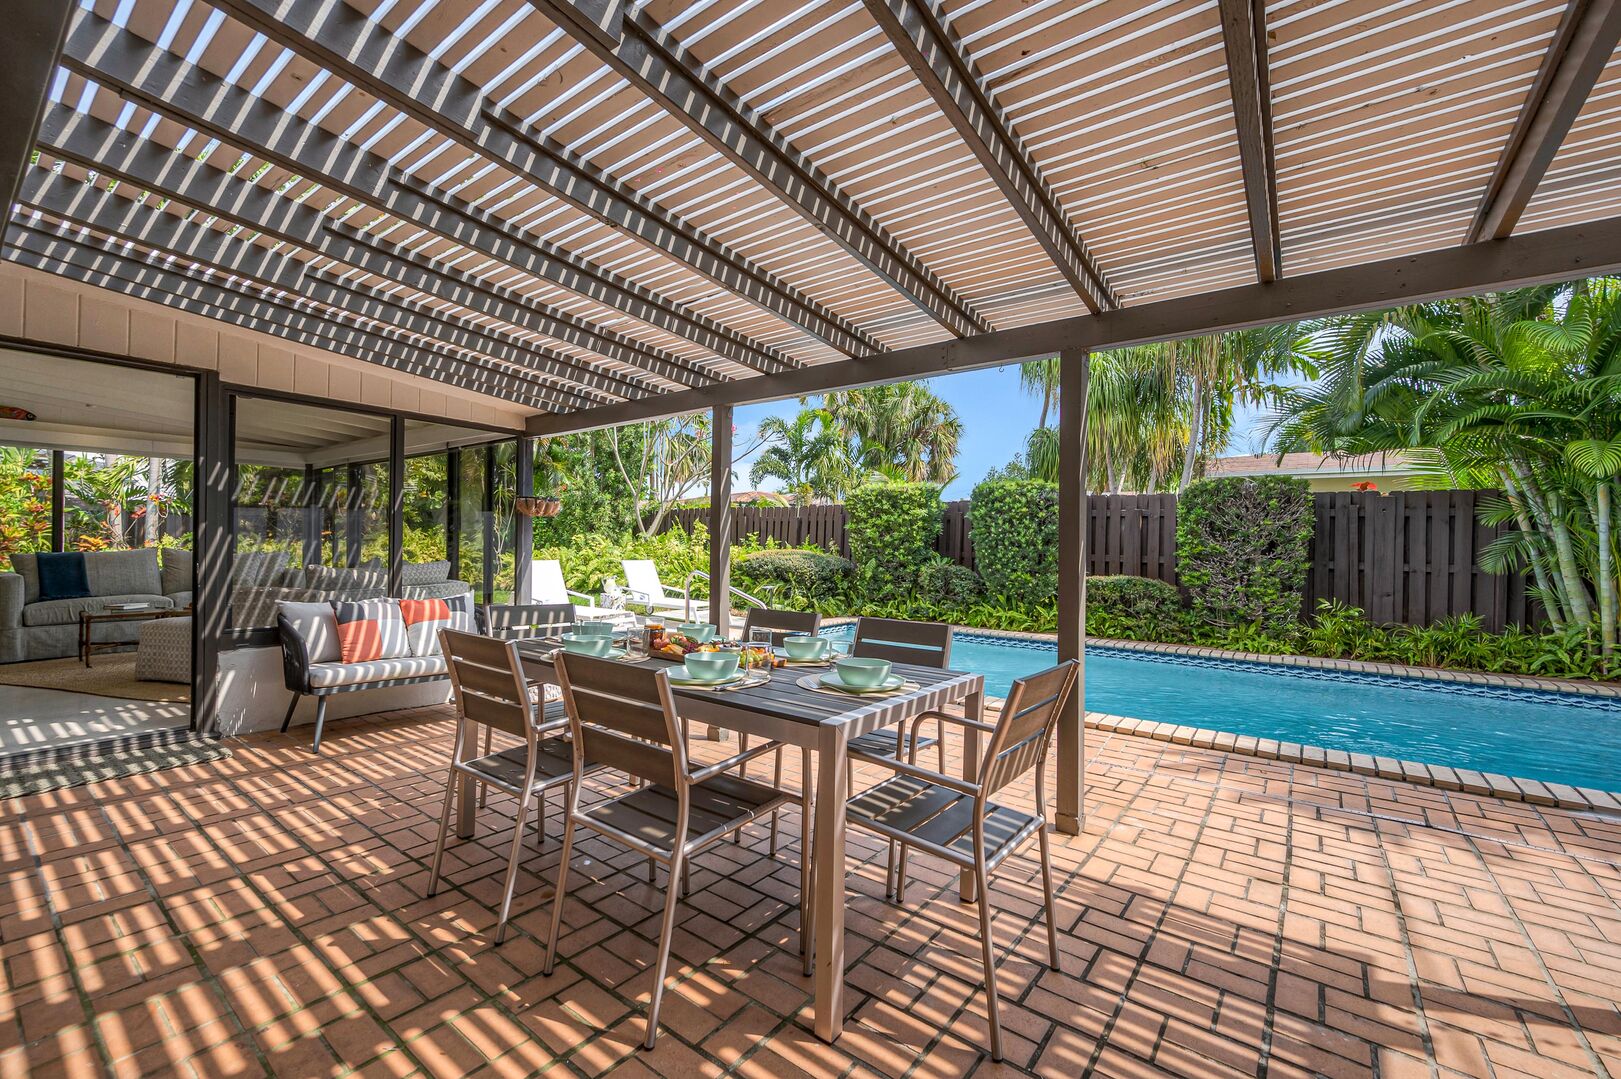 Shaded poolside al fresco dining with a grilling area in the lush garden.